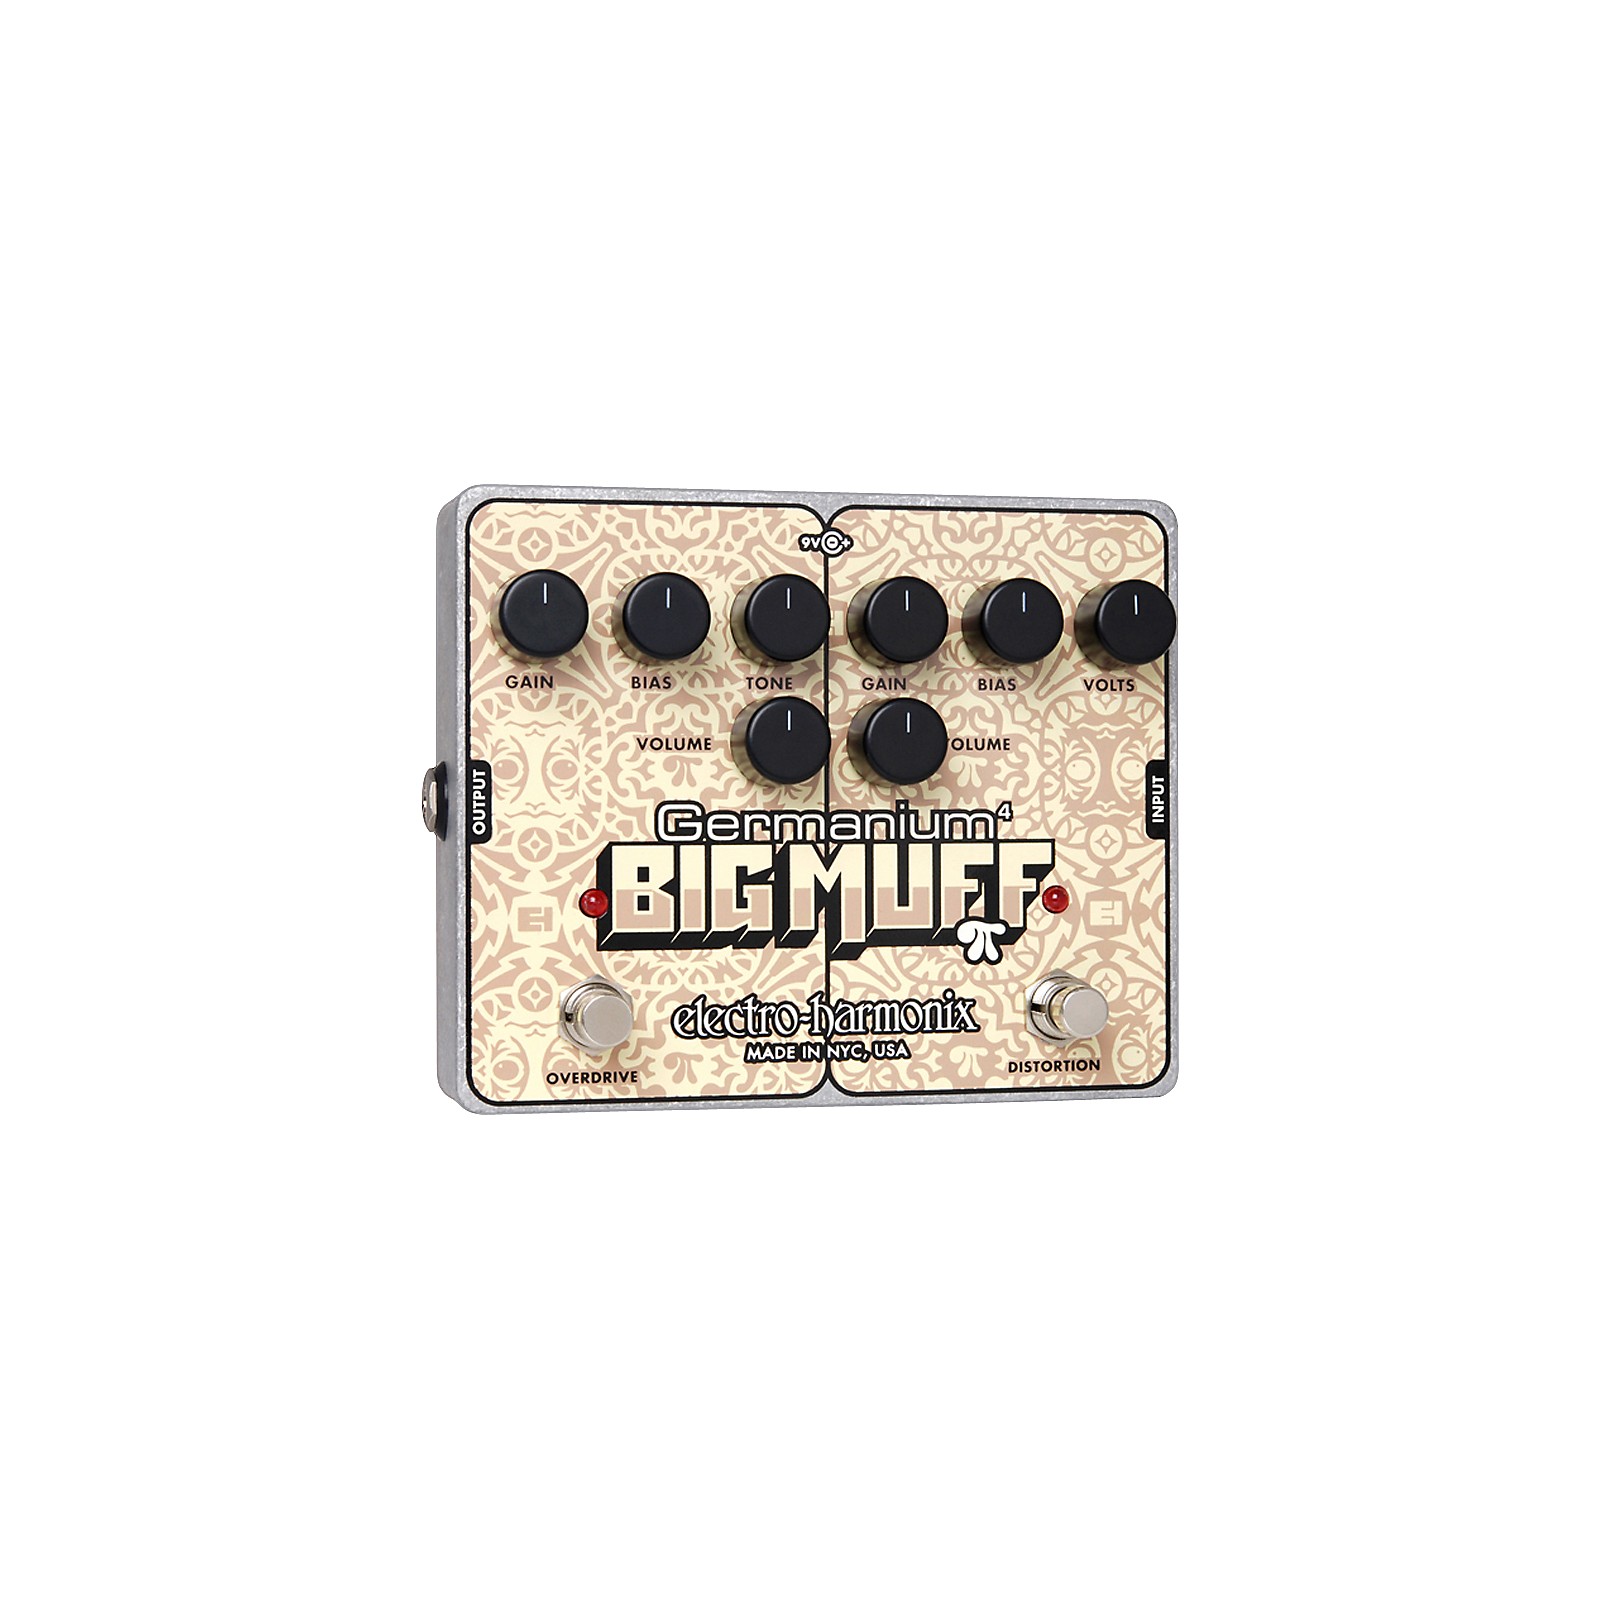 Electro-Harmonix Germanium 4 Big Muff Pi Overdrive and Distortion Guitar  Effects Pedal